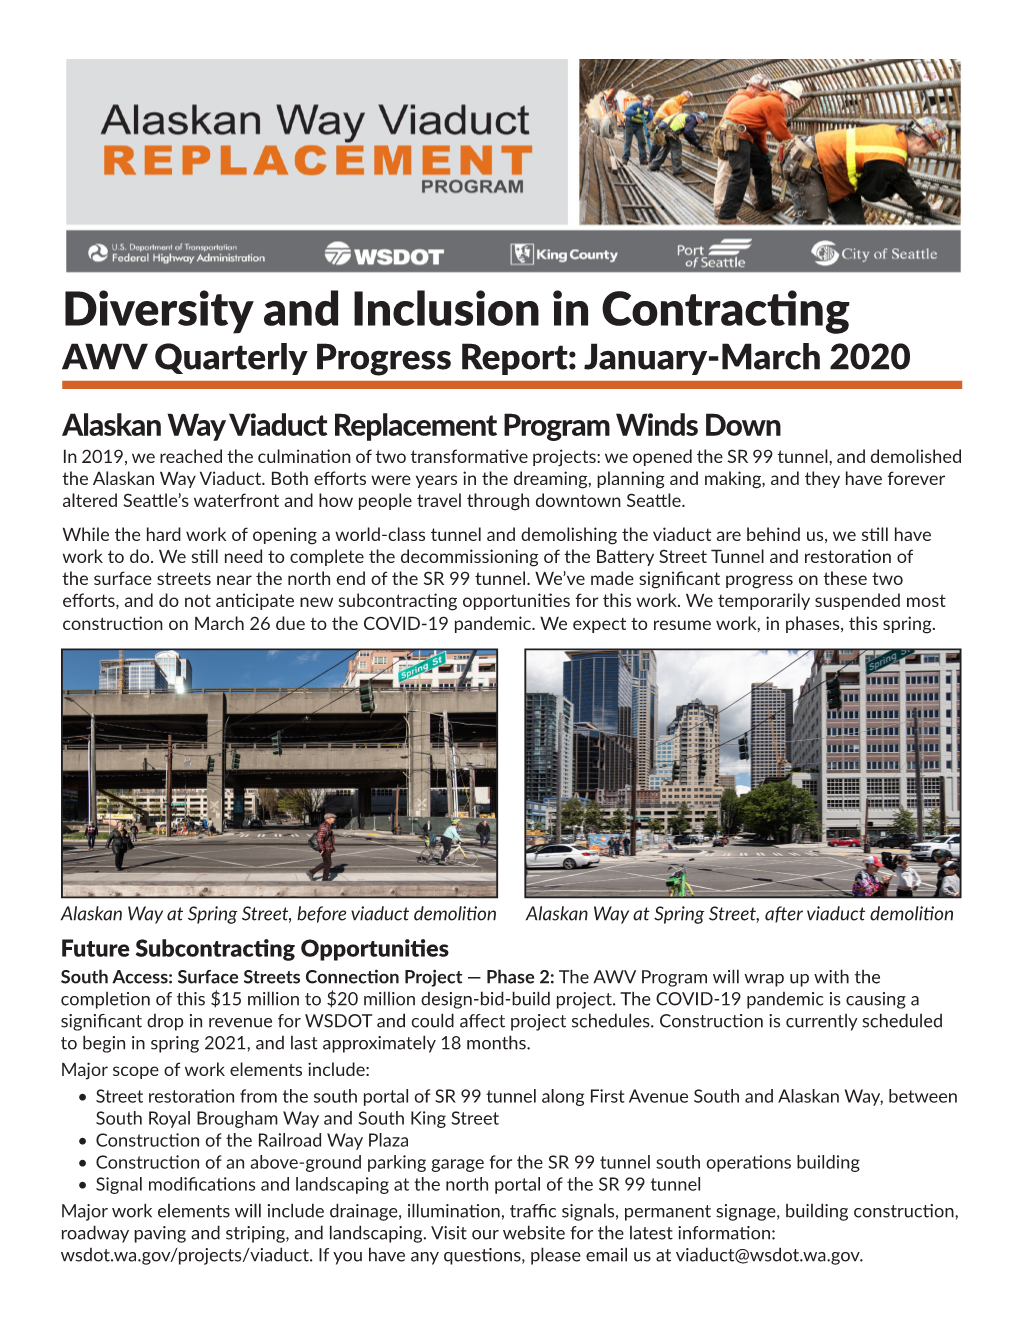 Alaskan Way Viaduct January to March 2020 Quarterly Report